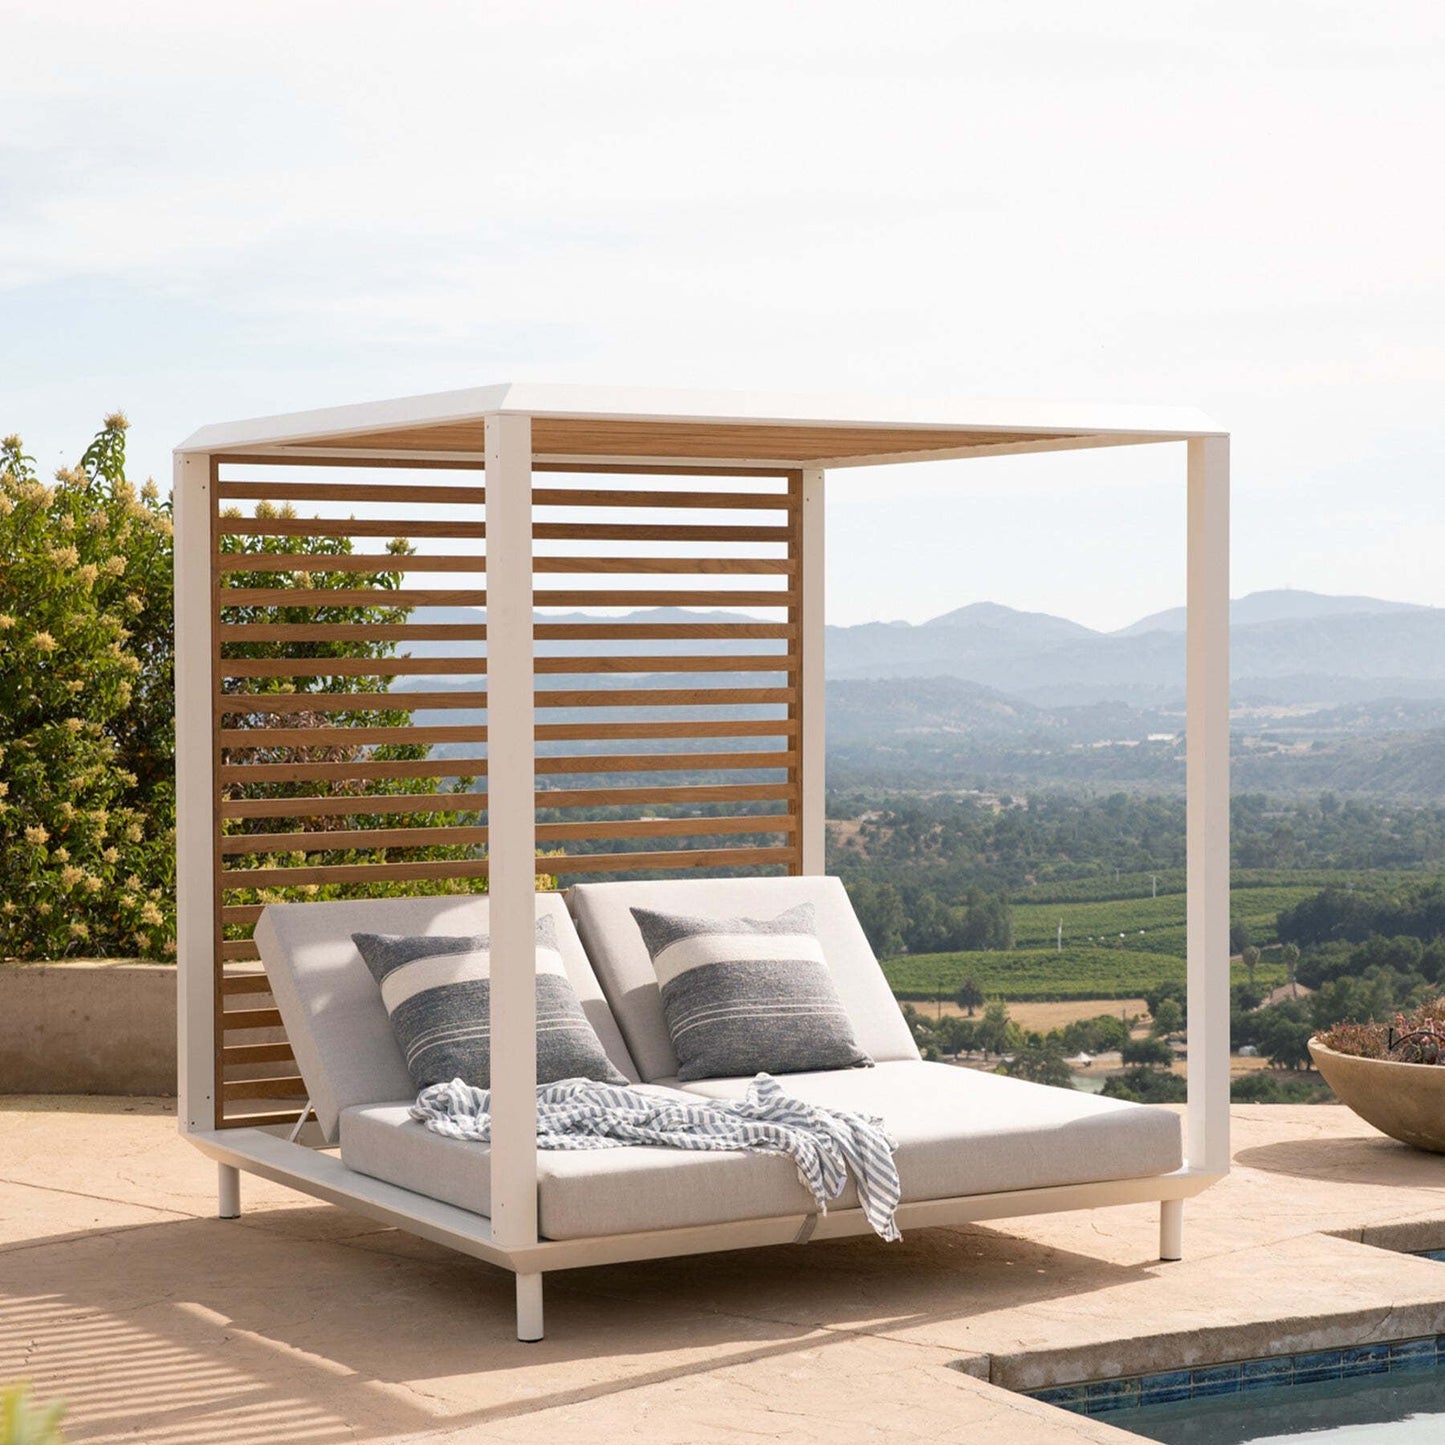 Outdoor All Weather Day Bed Lounger- Aluminum